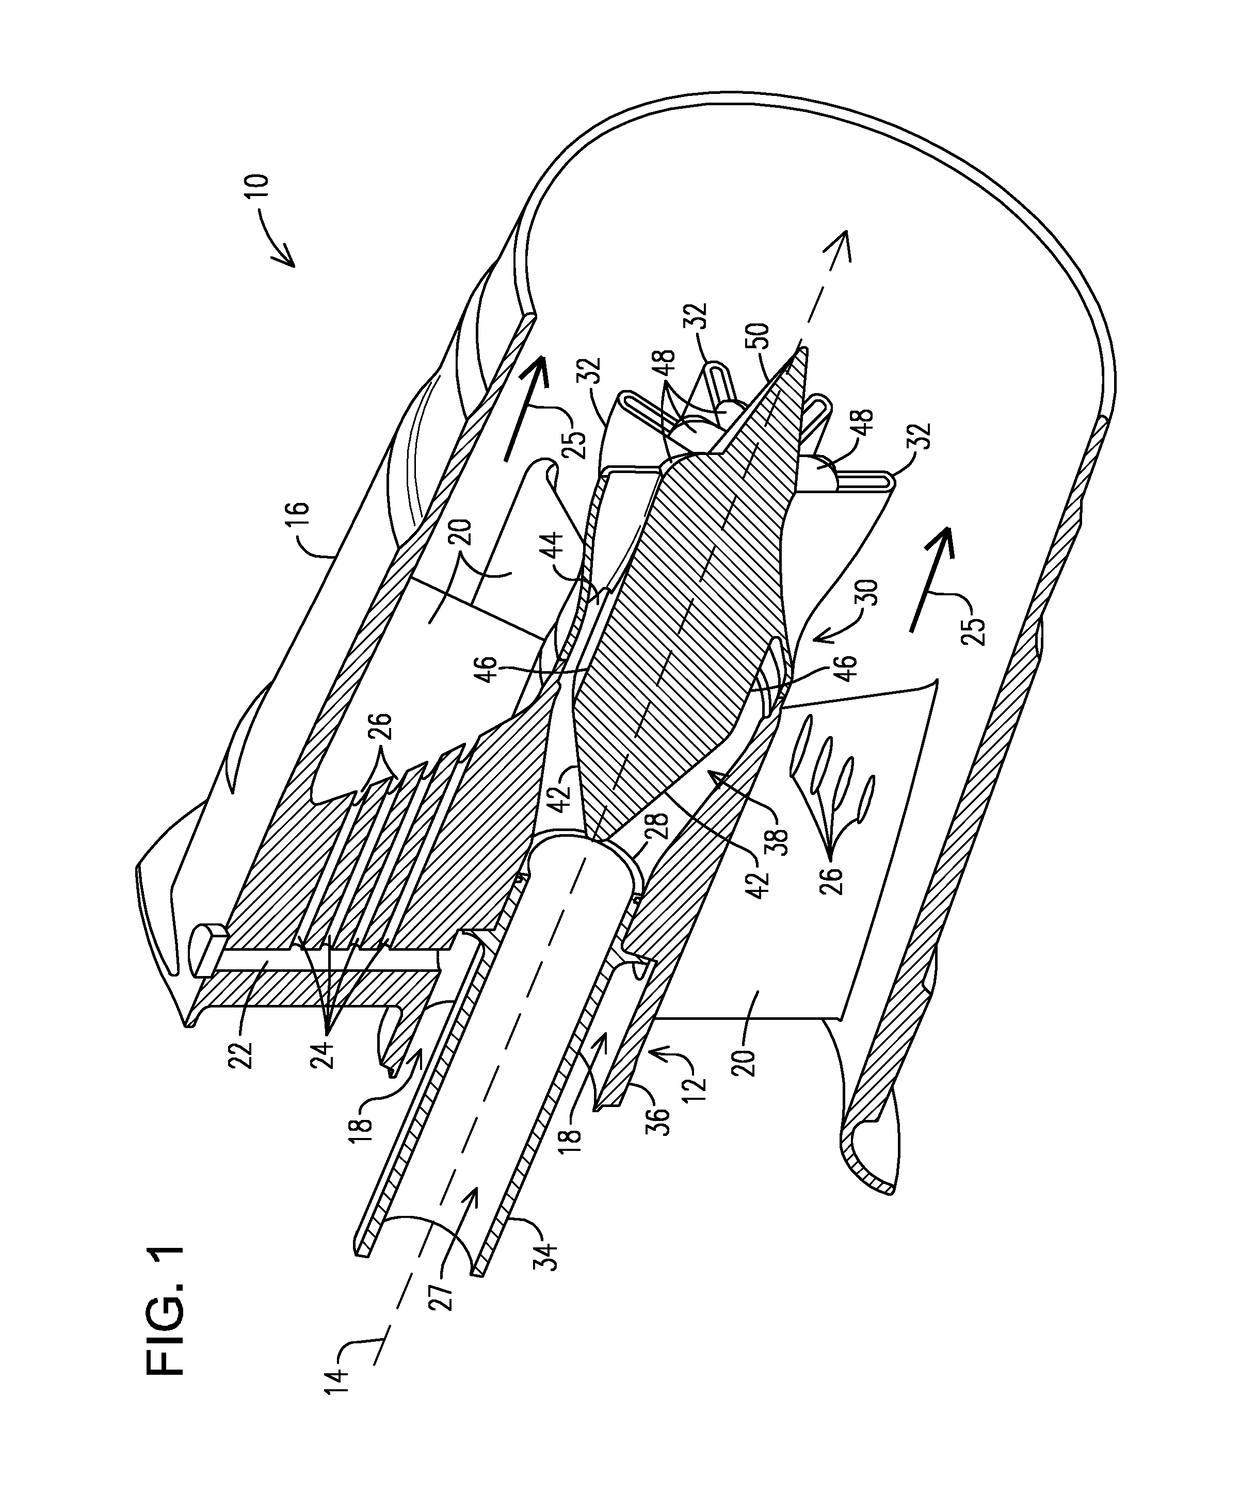 Fuel injector including a lobed mixer and vanes for injecting alternate fuels in a gas turbine